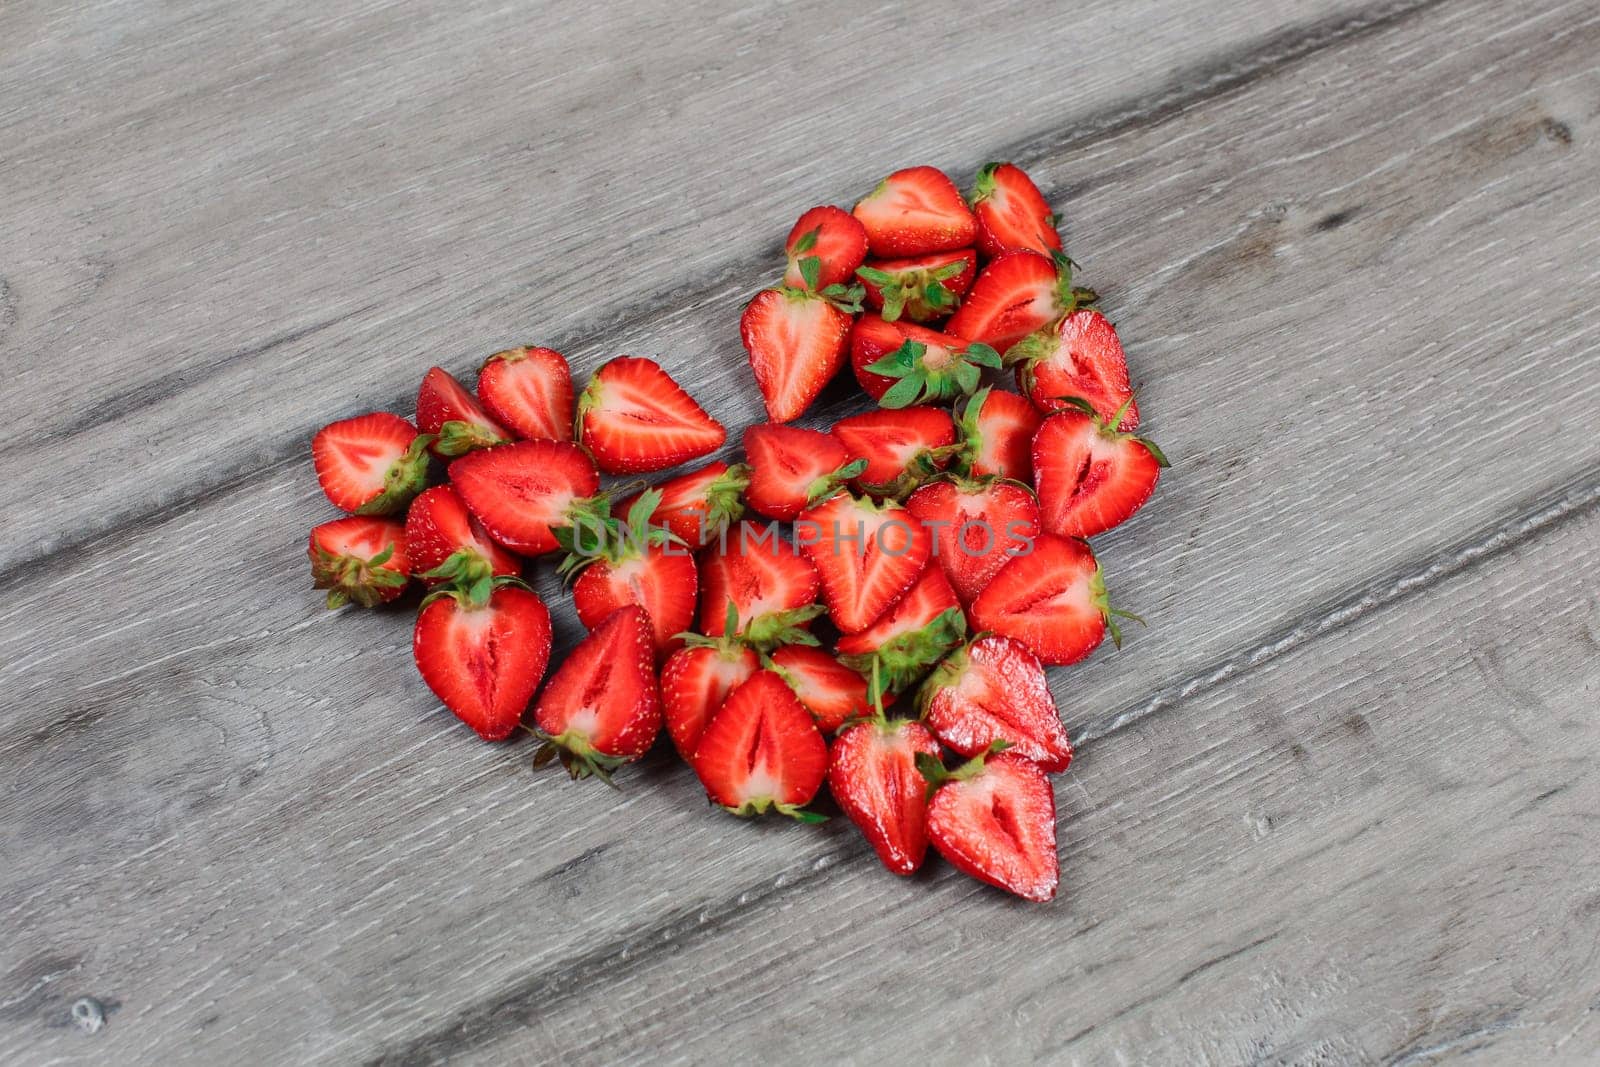 Strawberries cut in half, arranged to shape of heart, placed on gray wood desk.